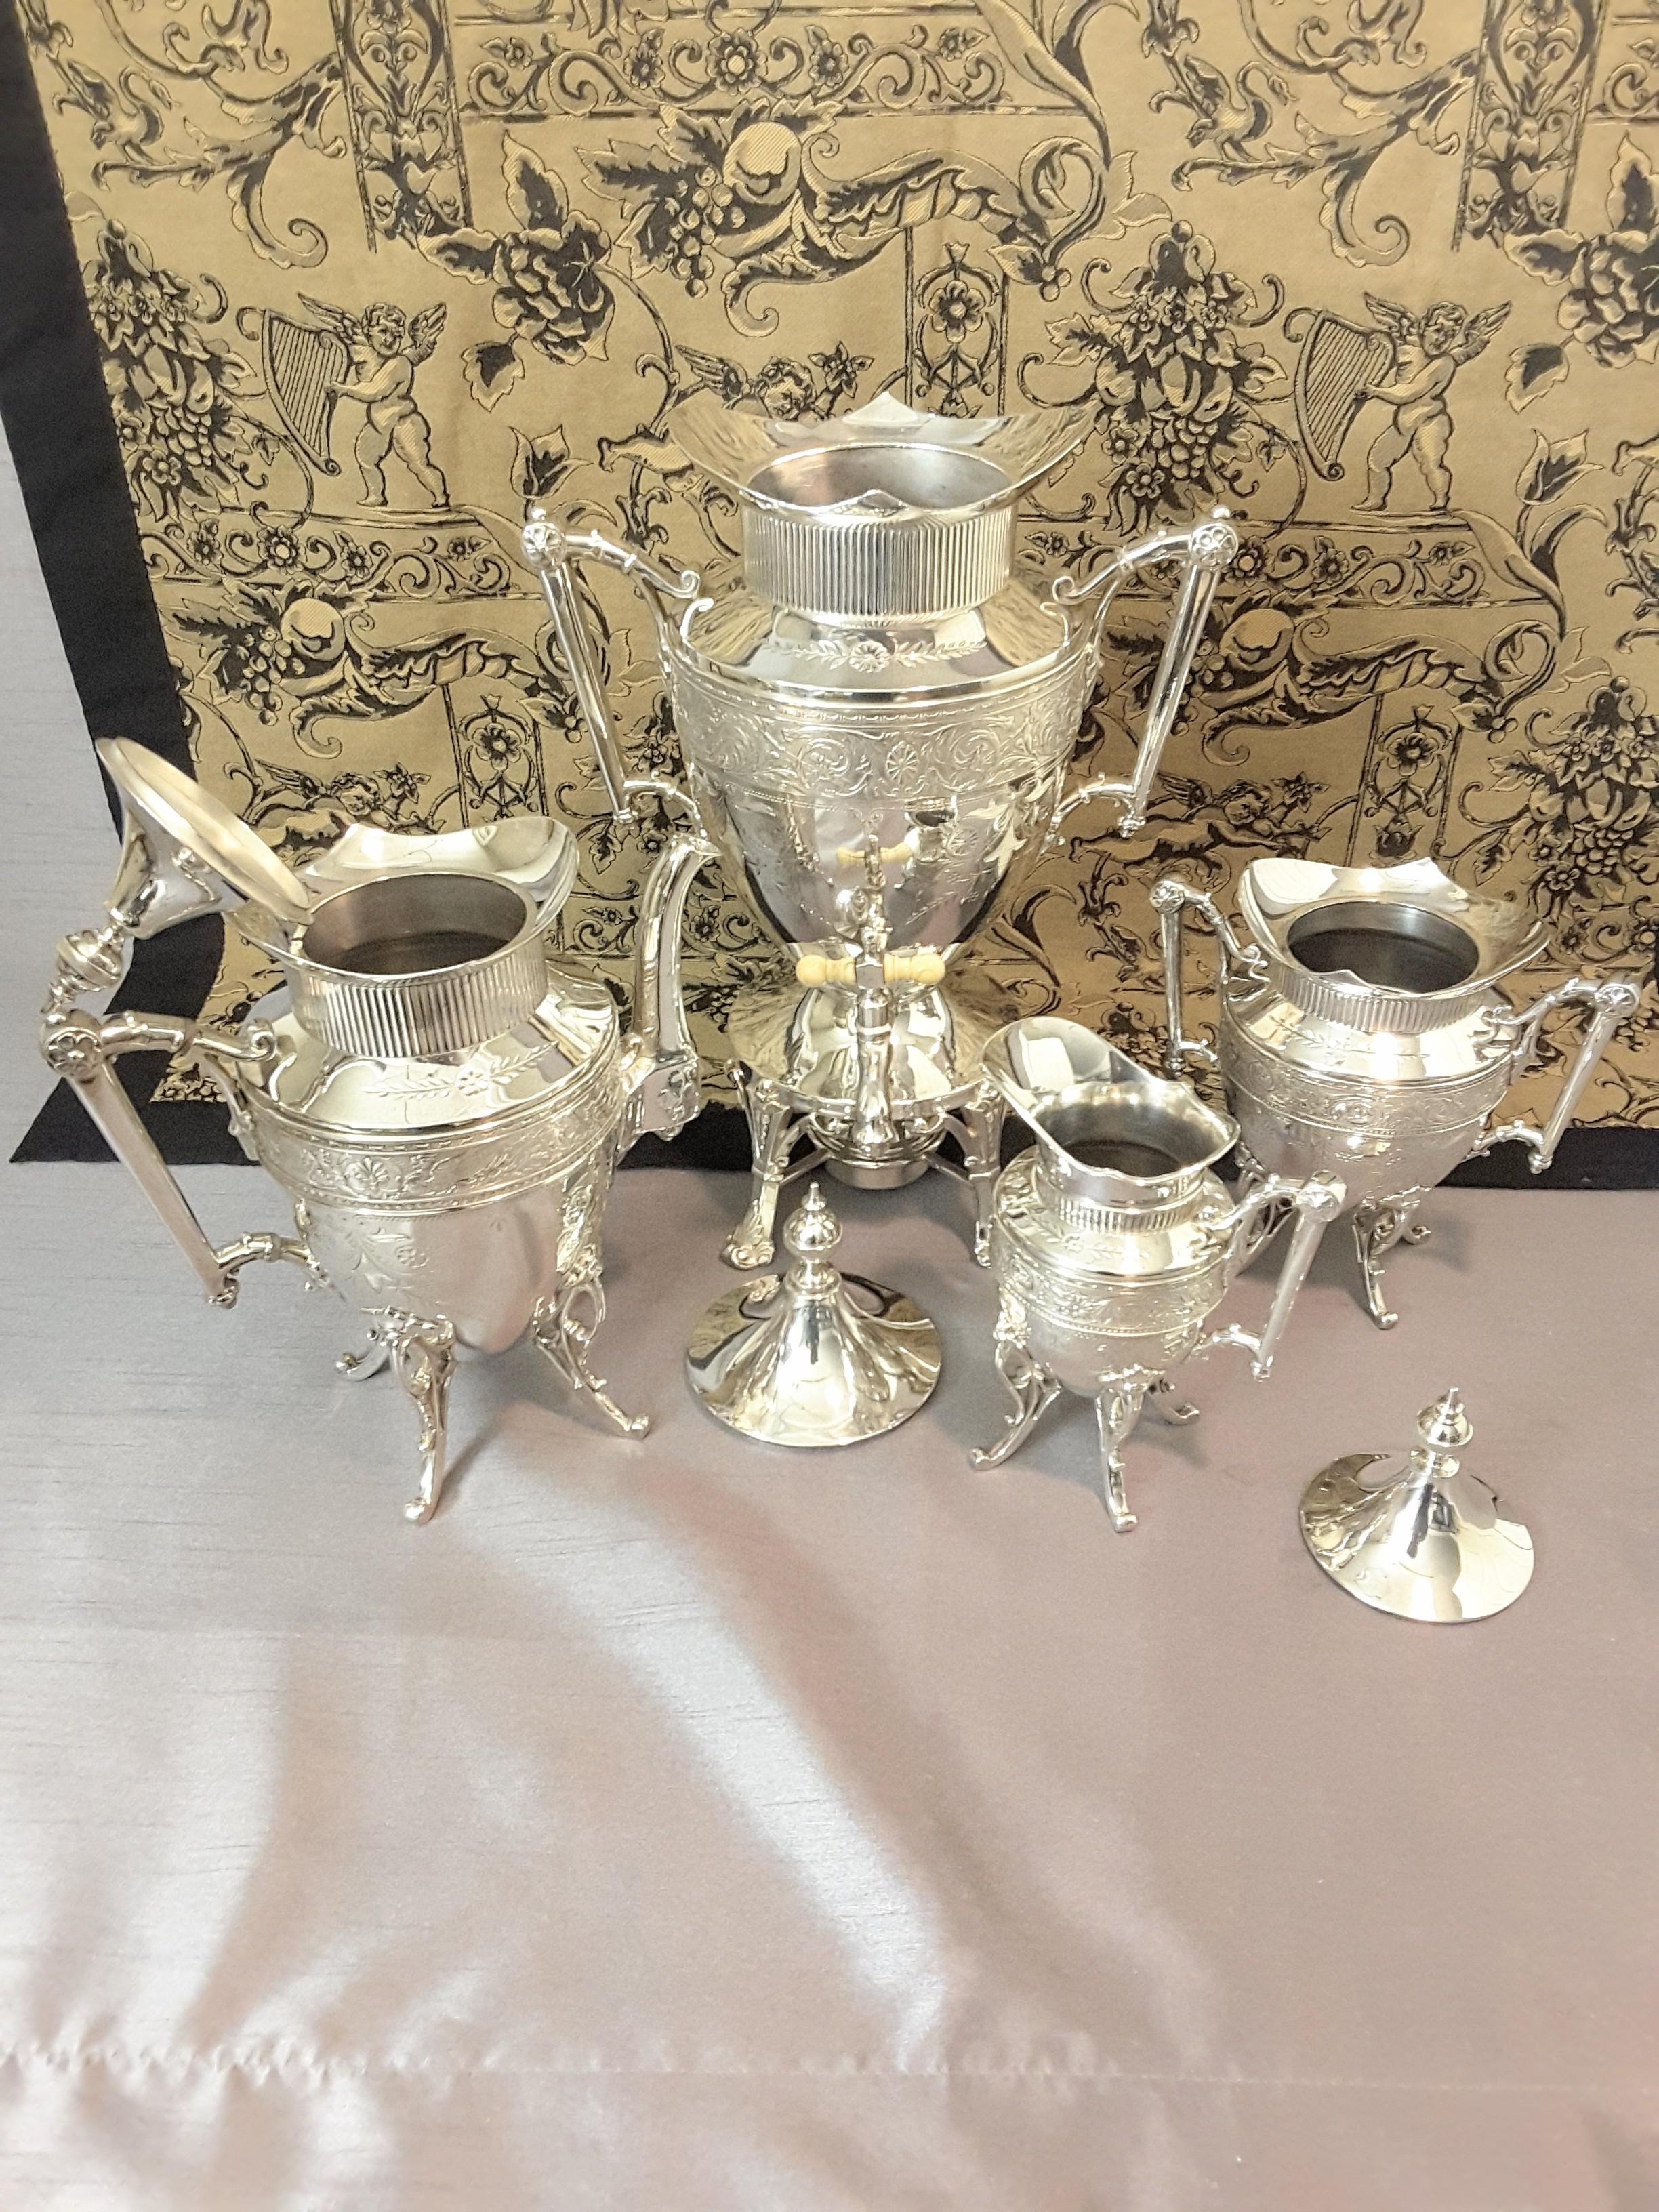 Exquisite Aesthetic Movement Silverplated Tea Service by Simpson, Hall & Miller For Sale 1